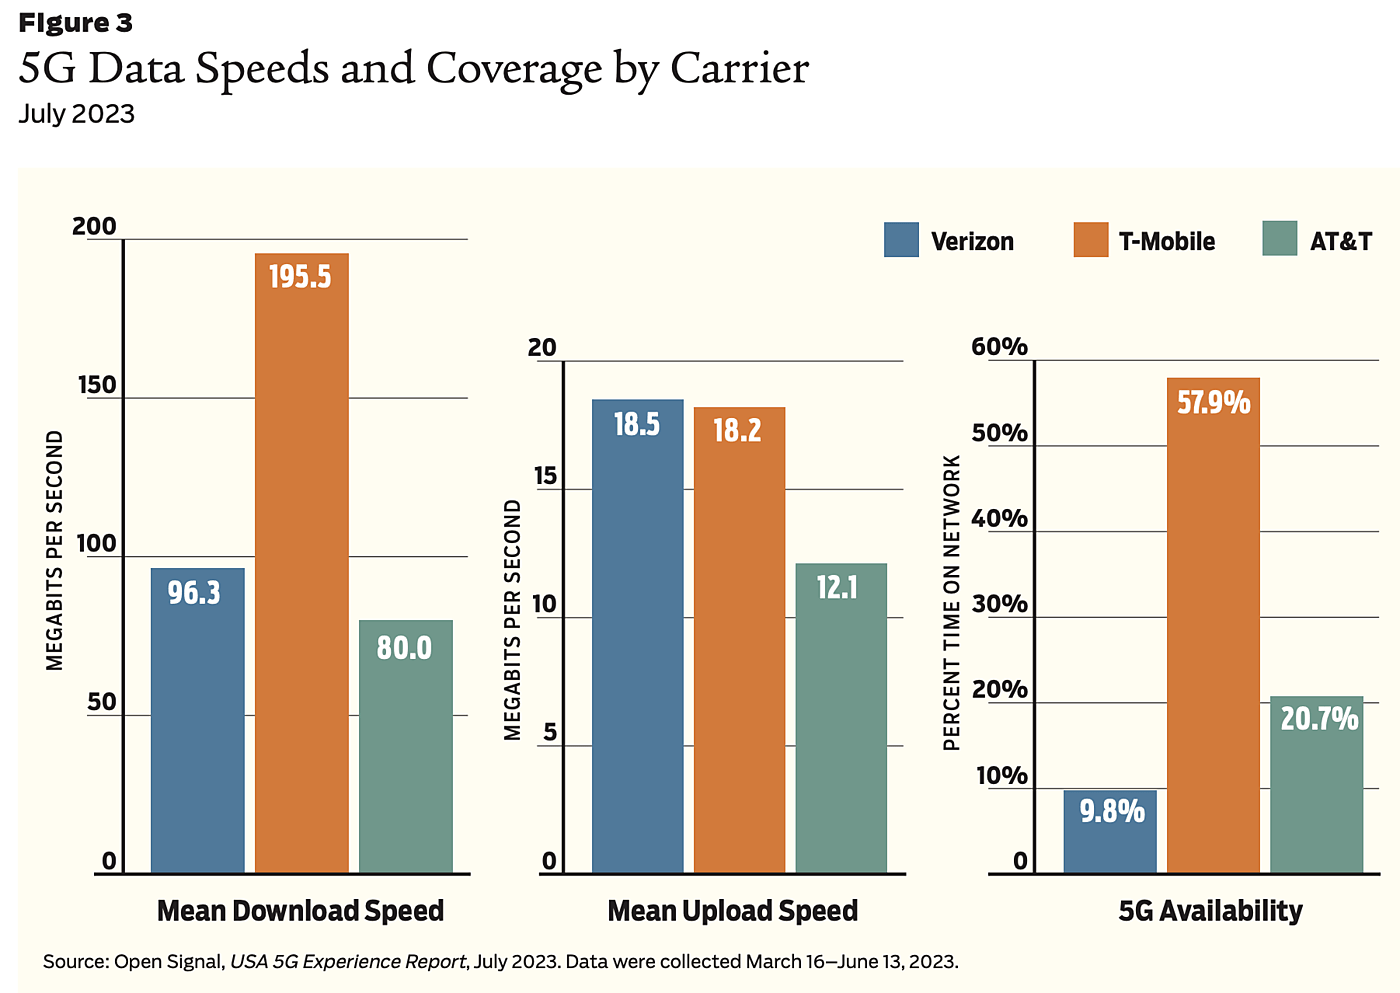 5G Data Speeds and Coverage by Carrier